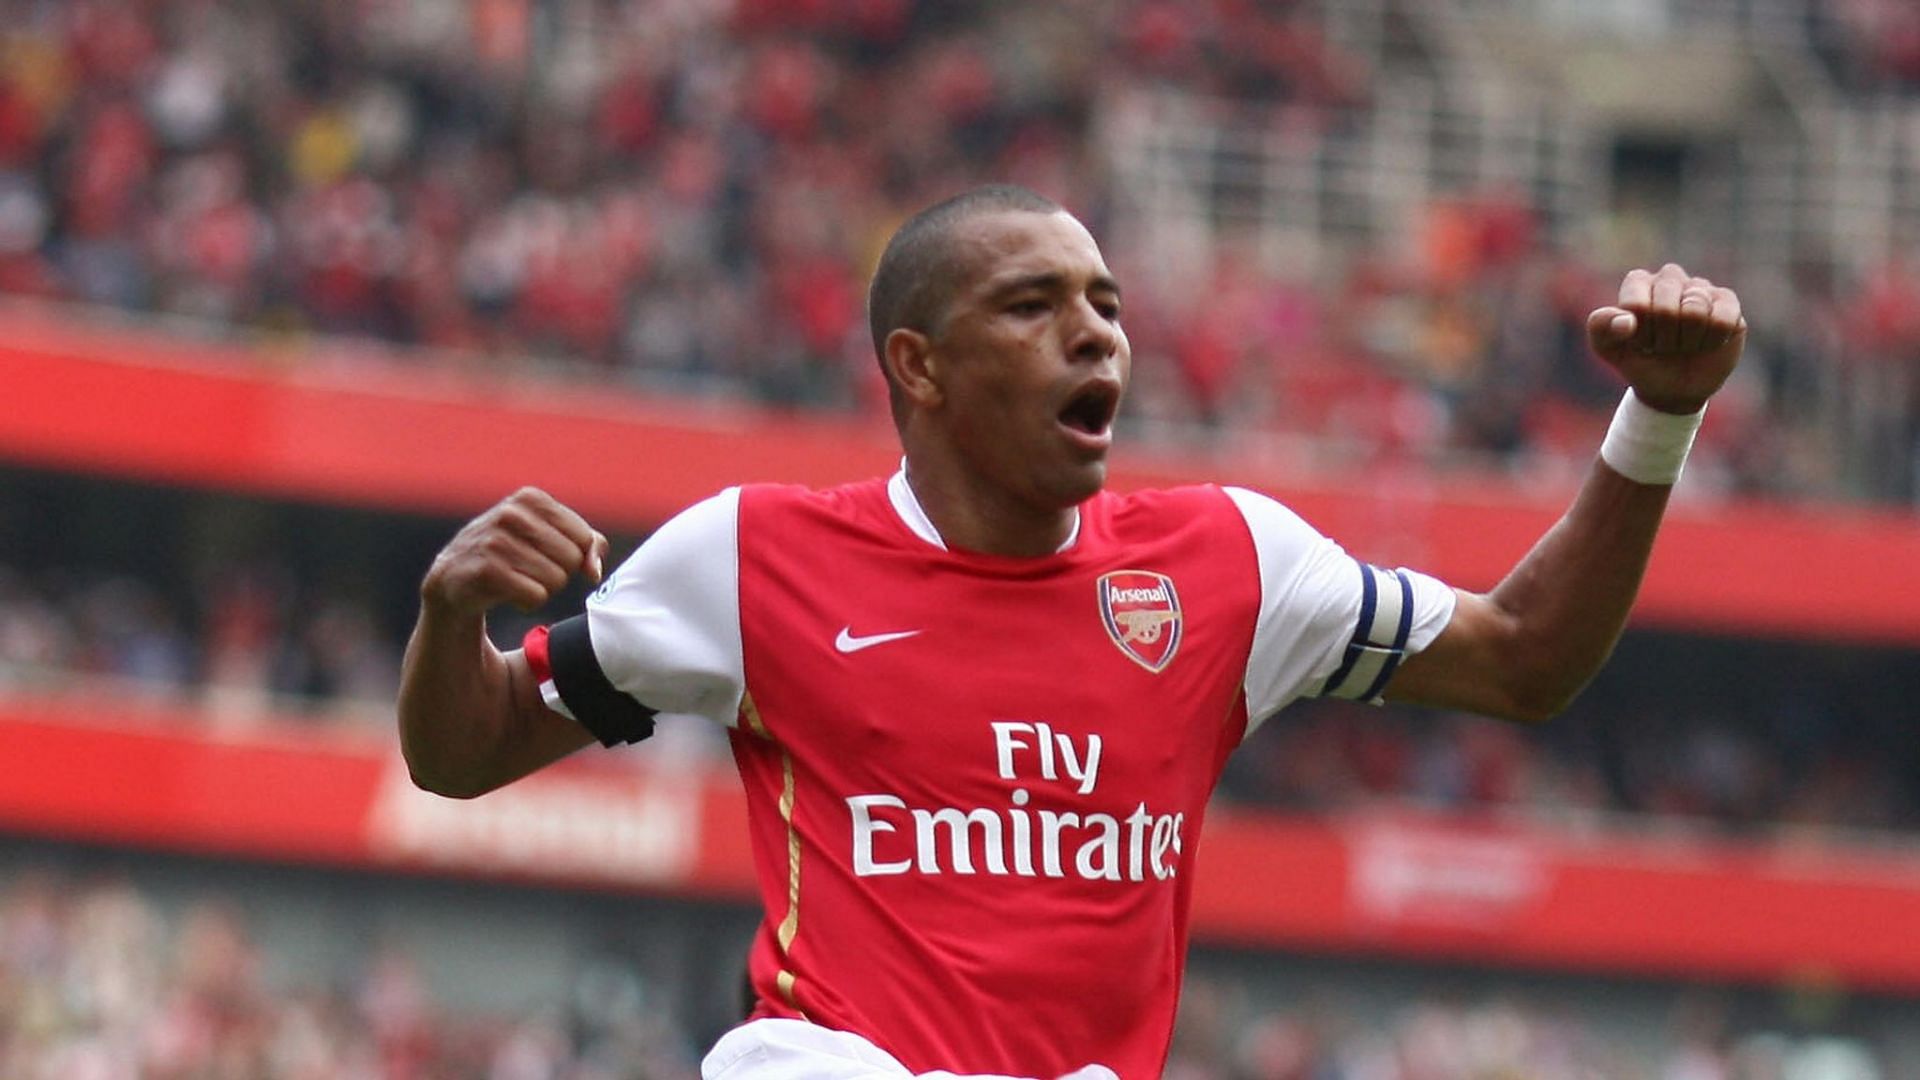 Gilberto Silva was a solid midfielder for his clubs as well as for Brazil.